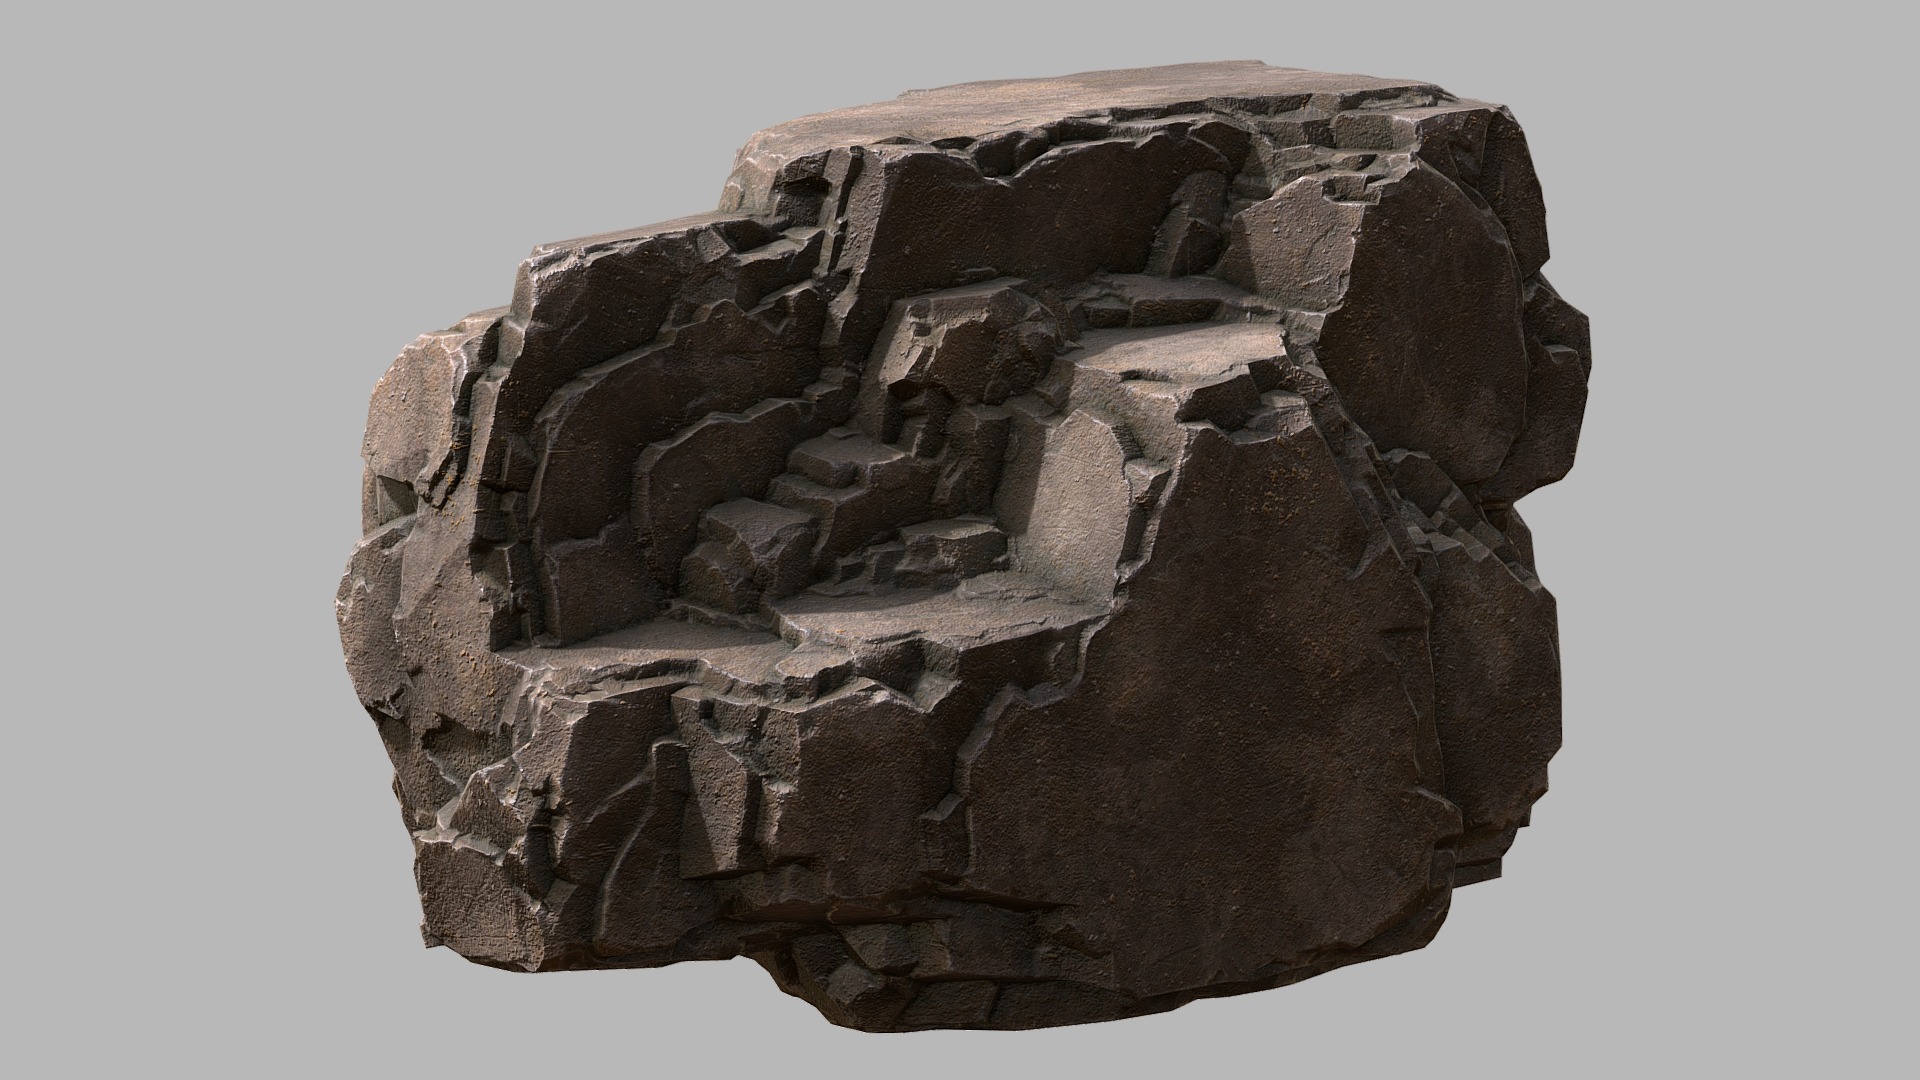 3D model Blocky Cliff - This is a 3D model of the Blocky Cliff. The 3D model is about a large rock with many jagged rocks.